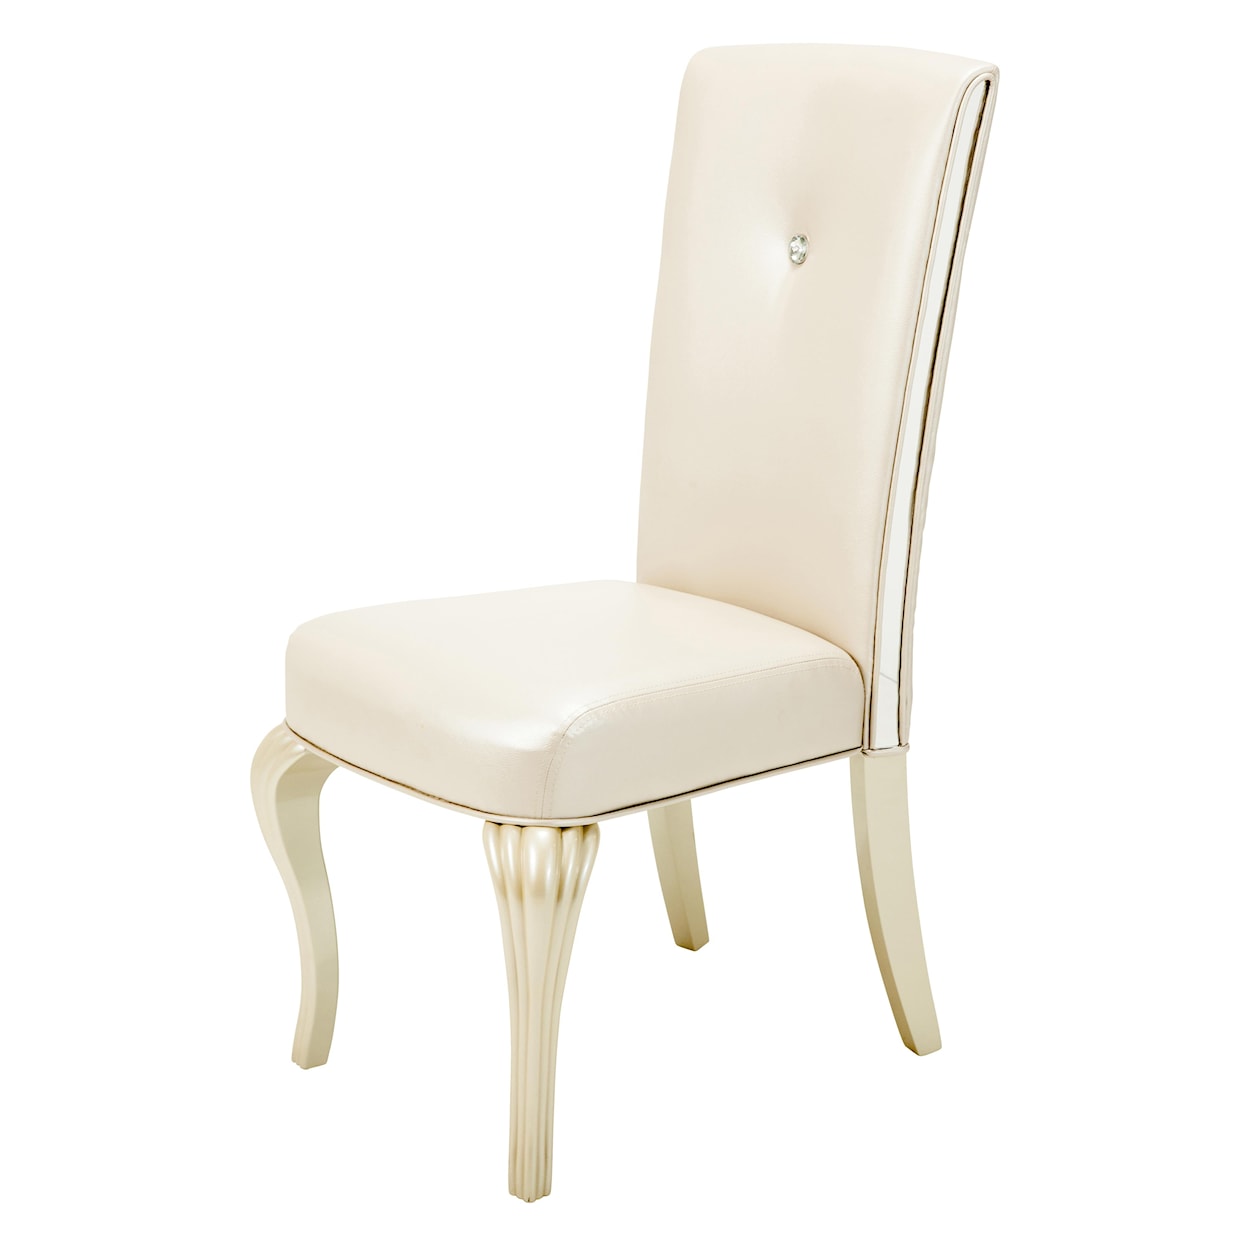 Michael Amini Hollywood Loft Upholstered Dining Chair